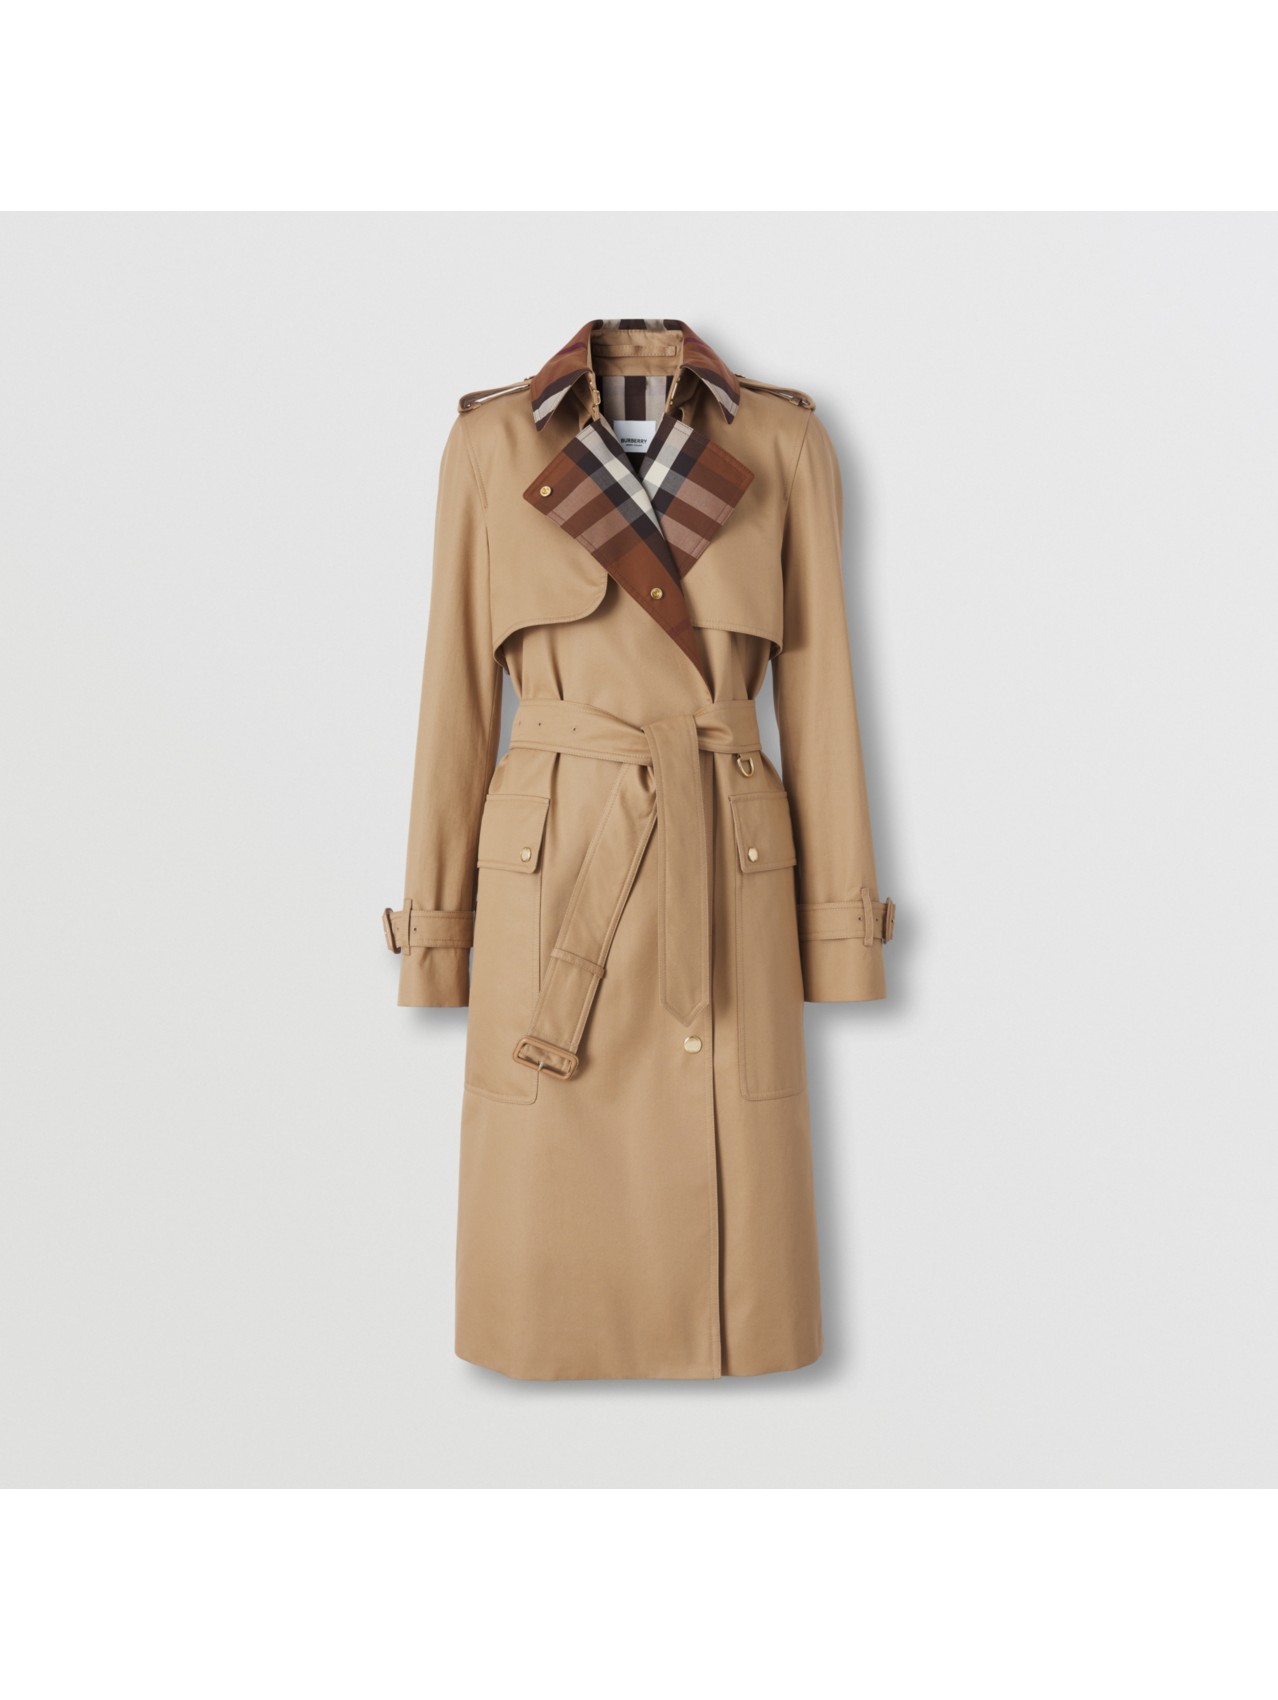 Women’s Unmistakably Burberry | Burberry® Official